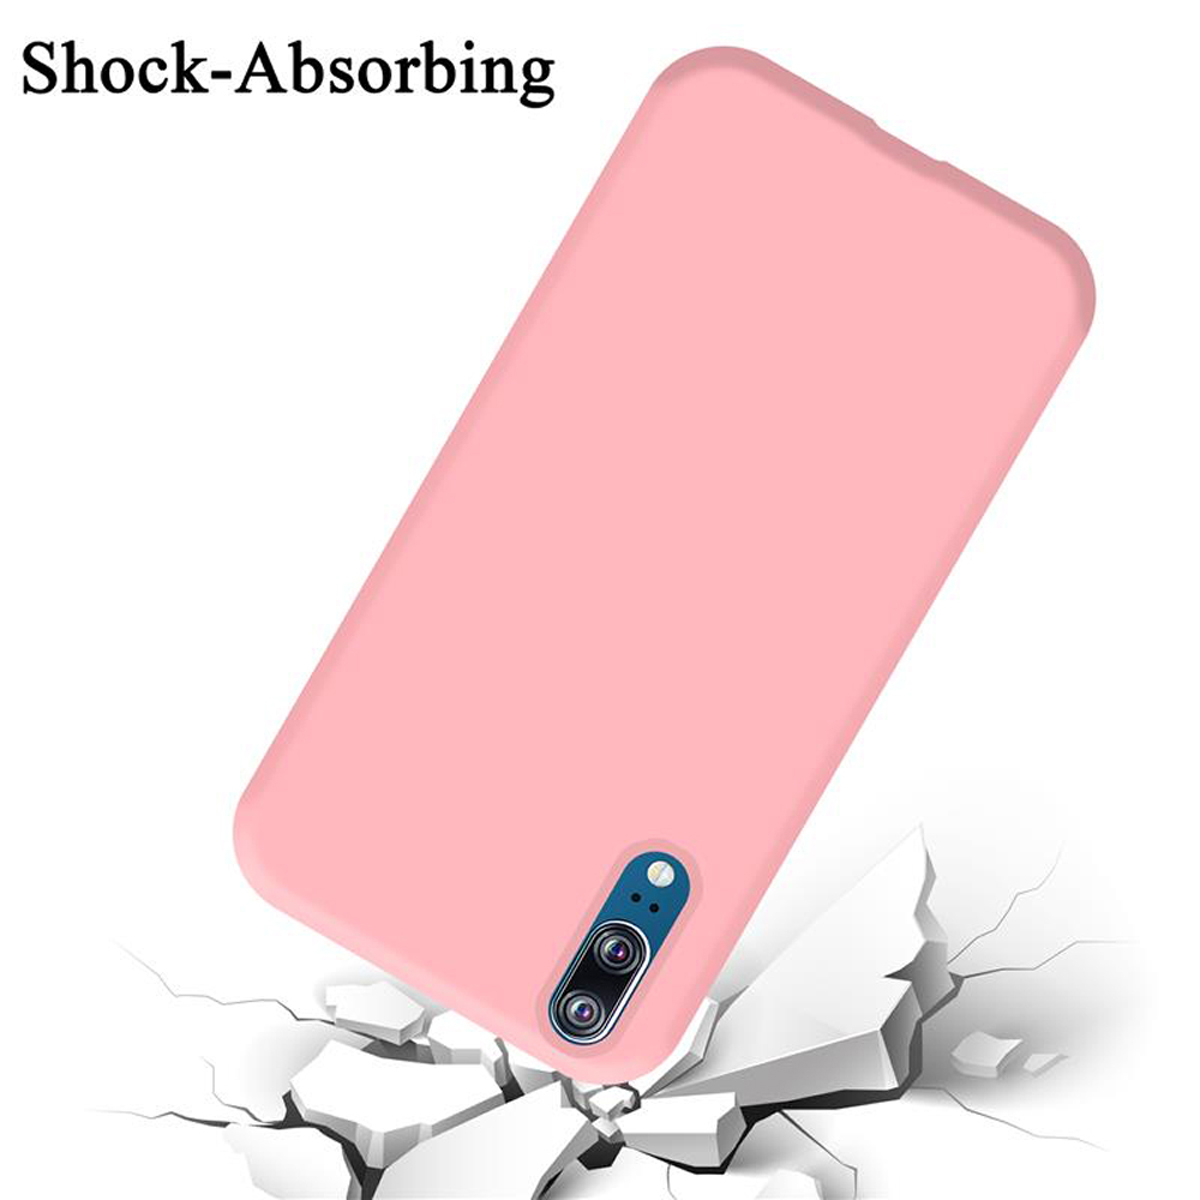 Silicone Huawei, Backcover, P20, Hülle LIQUID PINK Style, CADORABO Case im Liquid